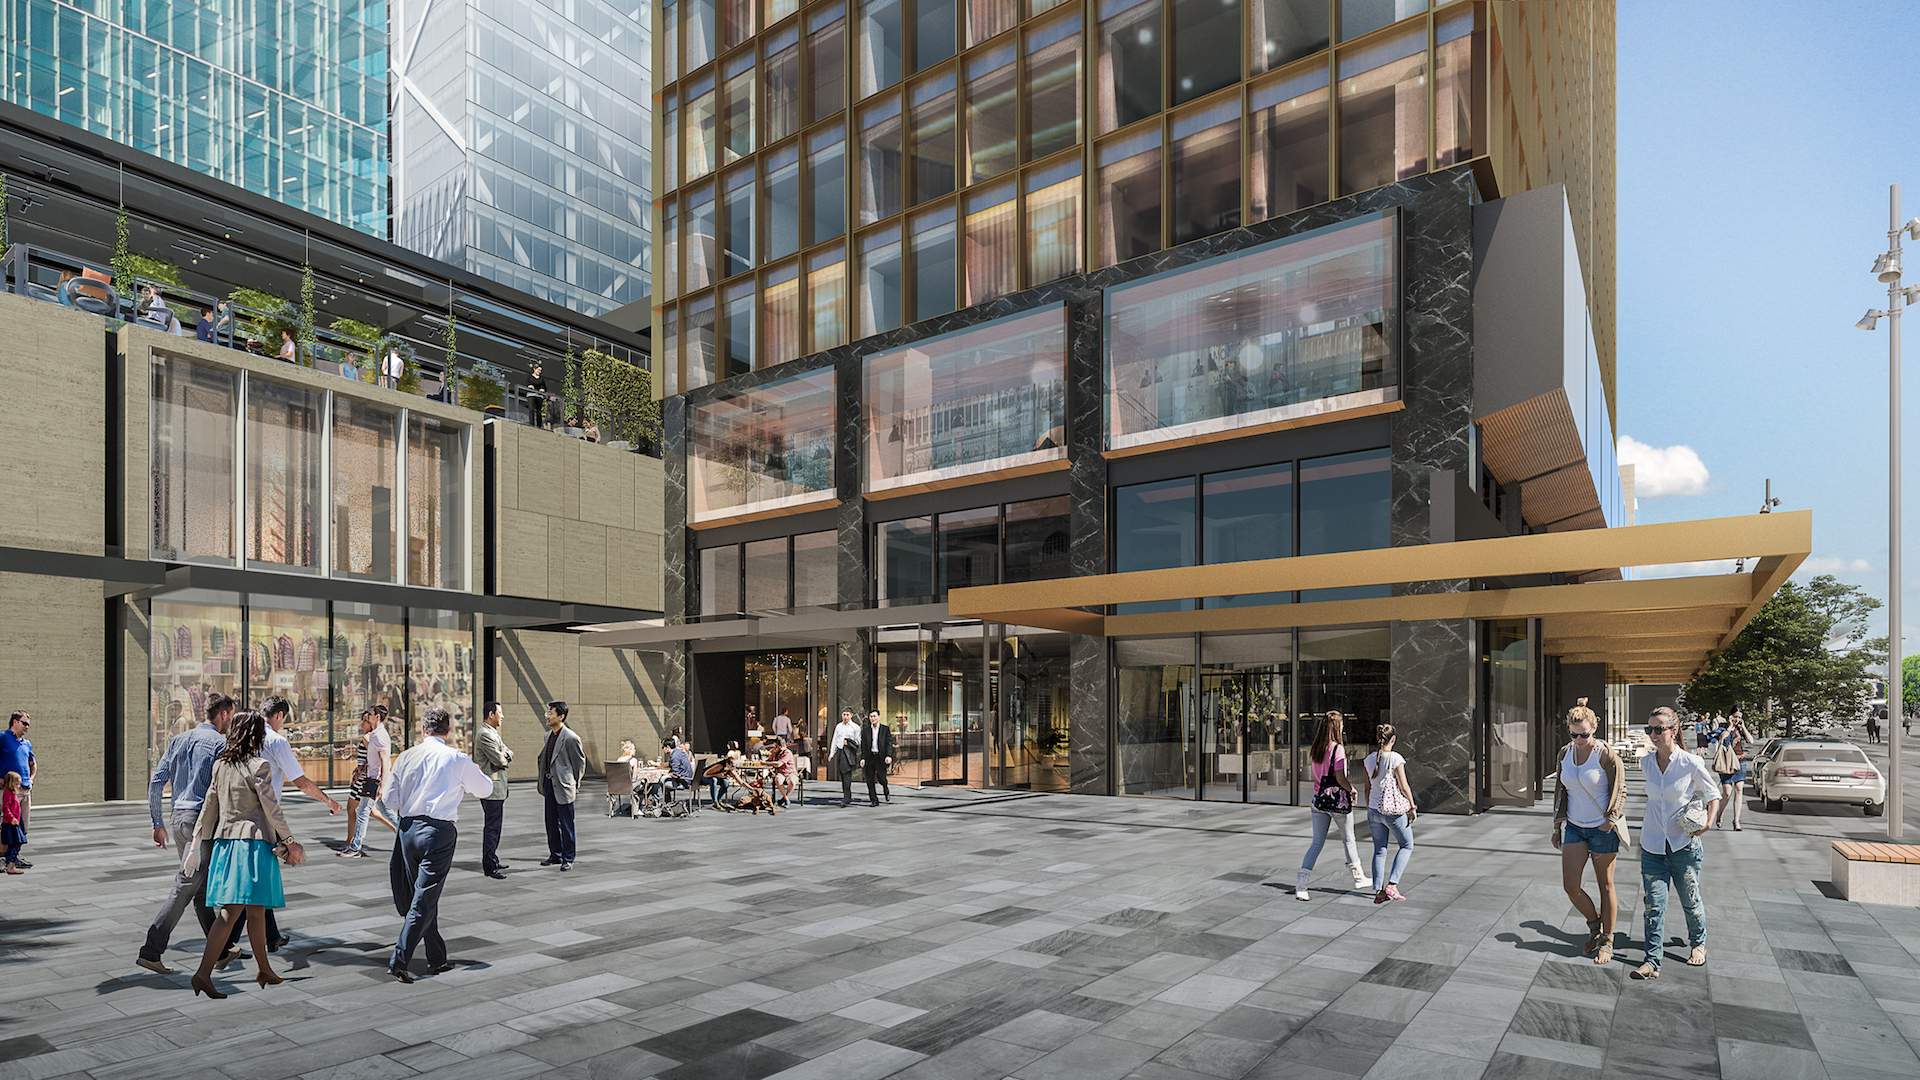 A 244-Room Luxury Hotel Has Been Announced As Part of Auckland's Commercial Bay Development